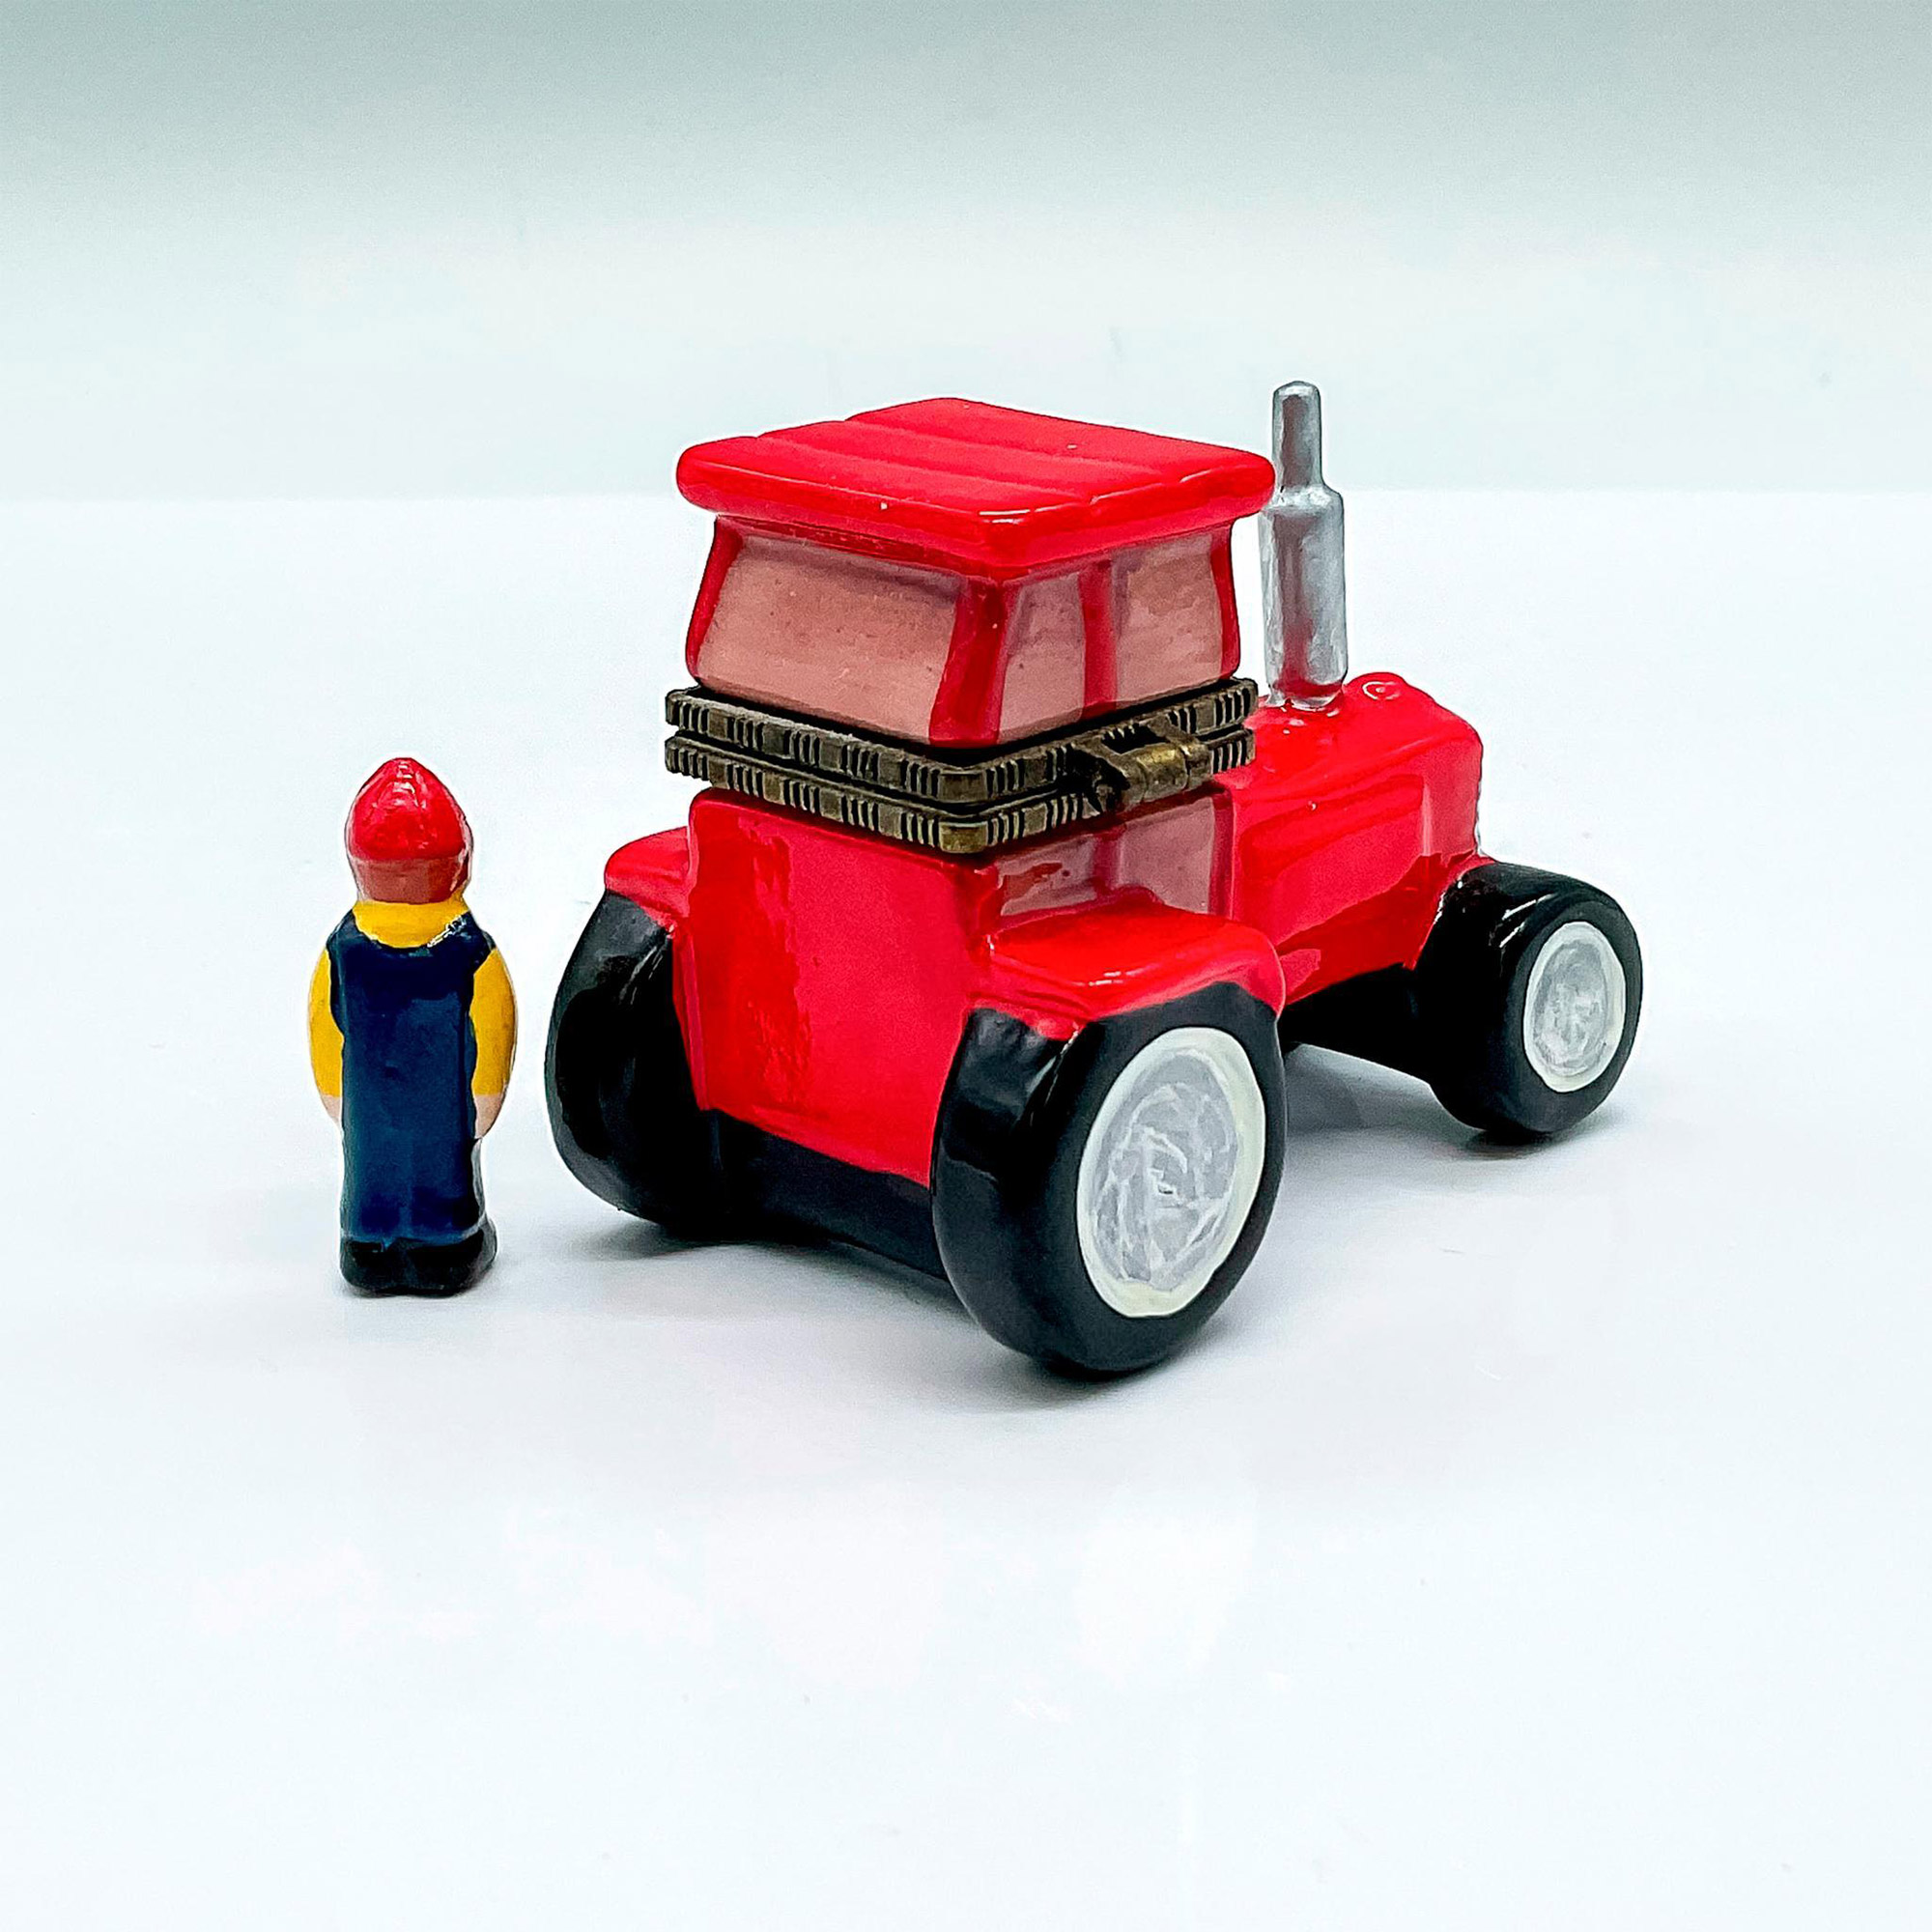 Porcelain Miniature Hinged Box, Tractor - Image 2 of 4